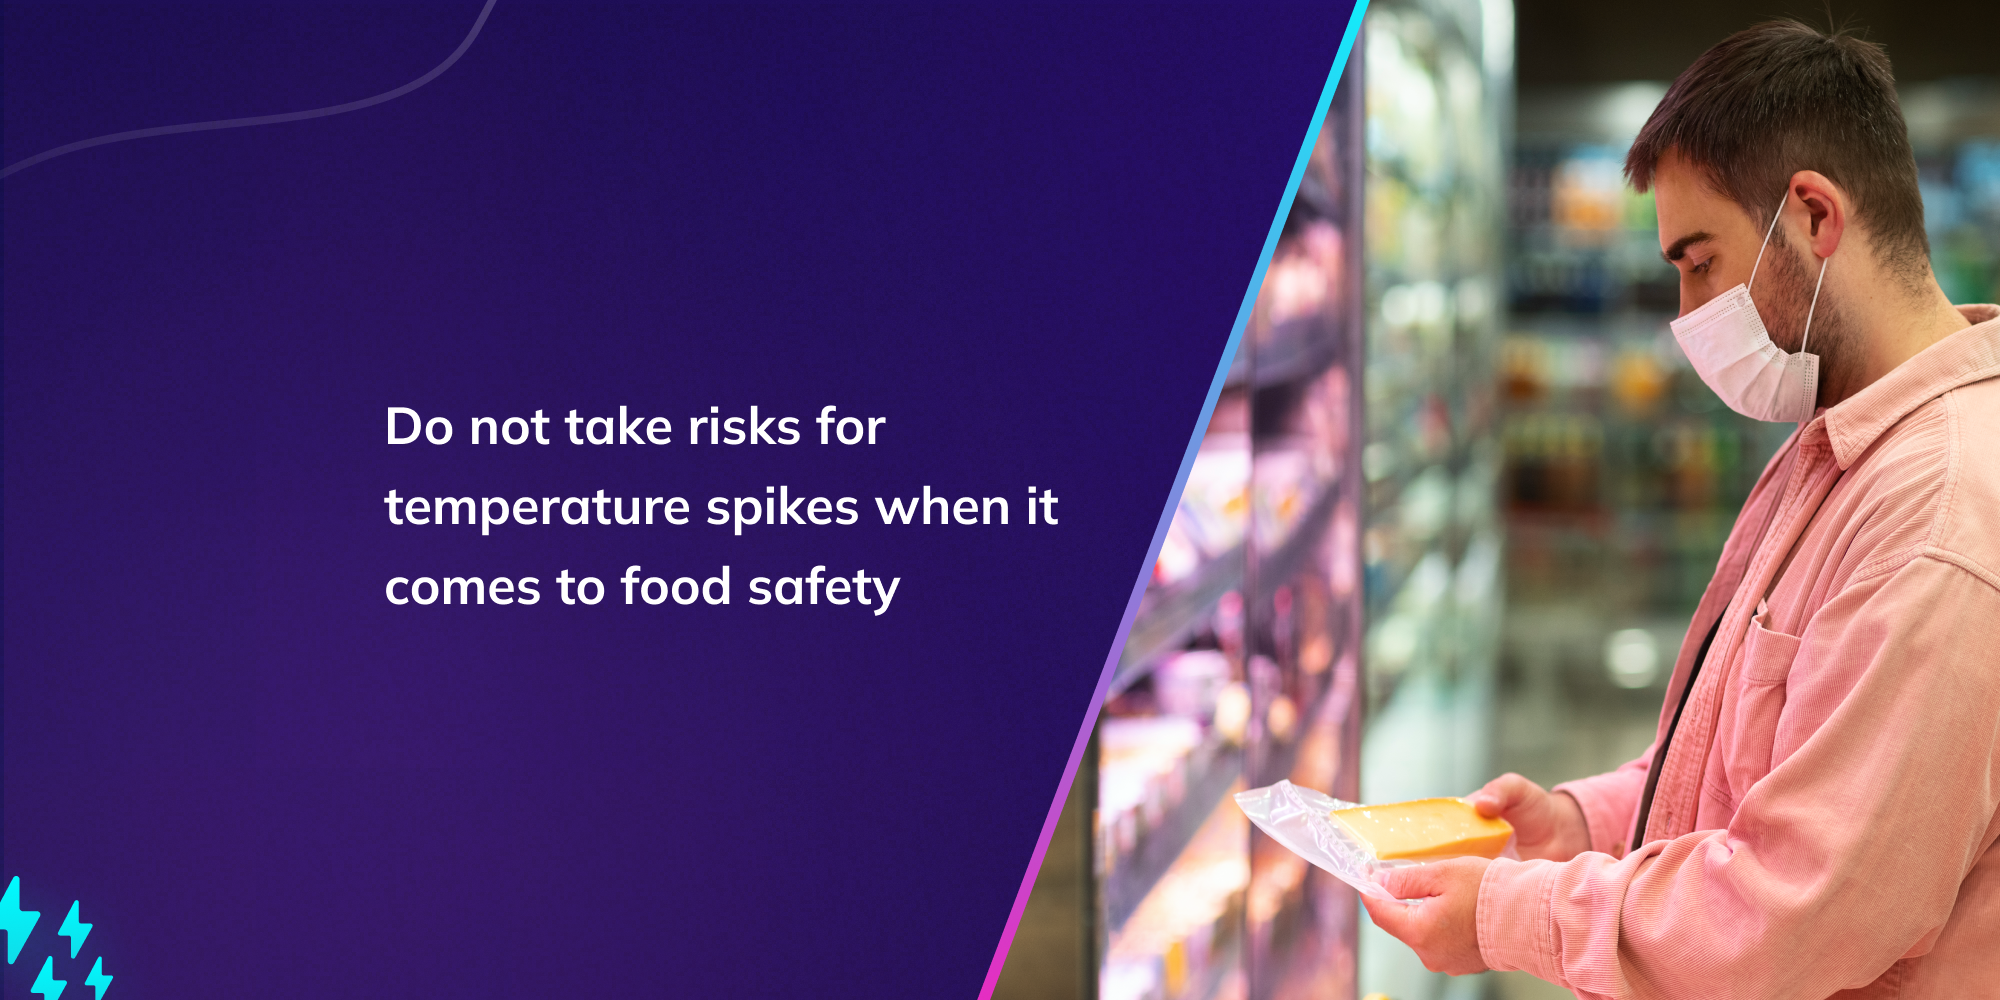 Do not take risks for temperature spikes when it comes to food safety